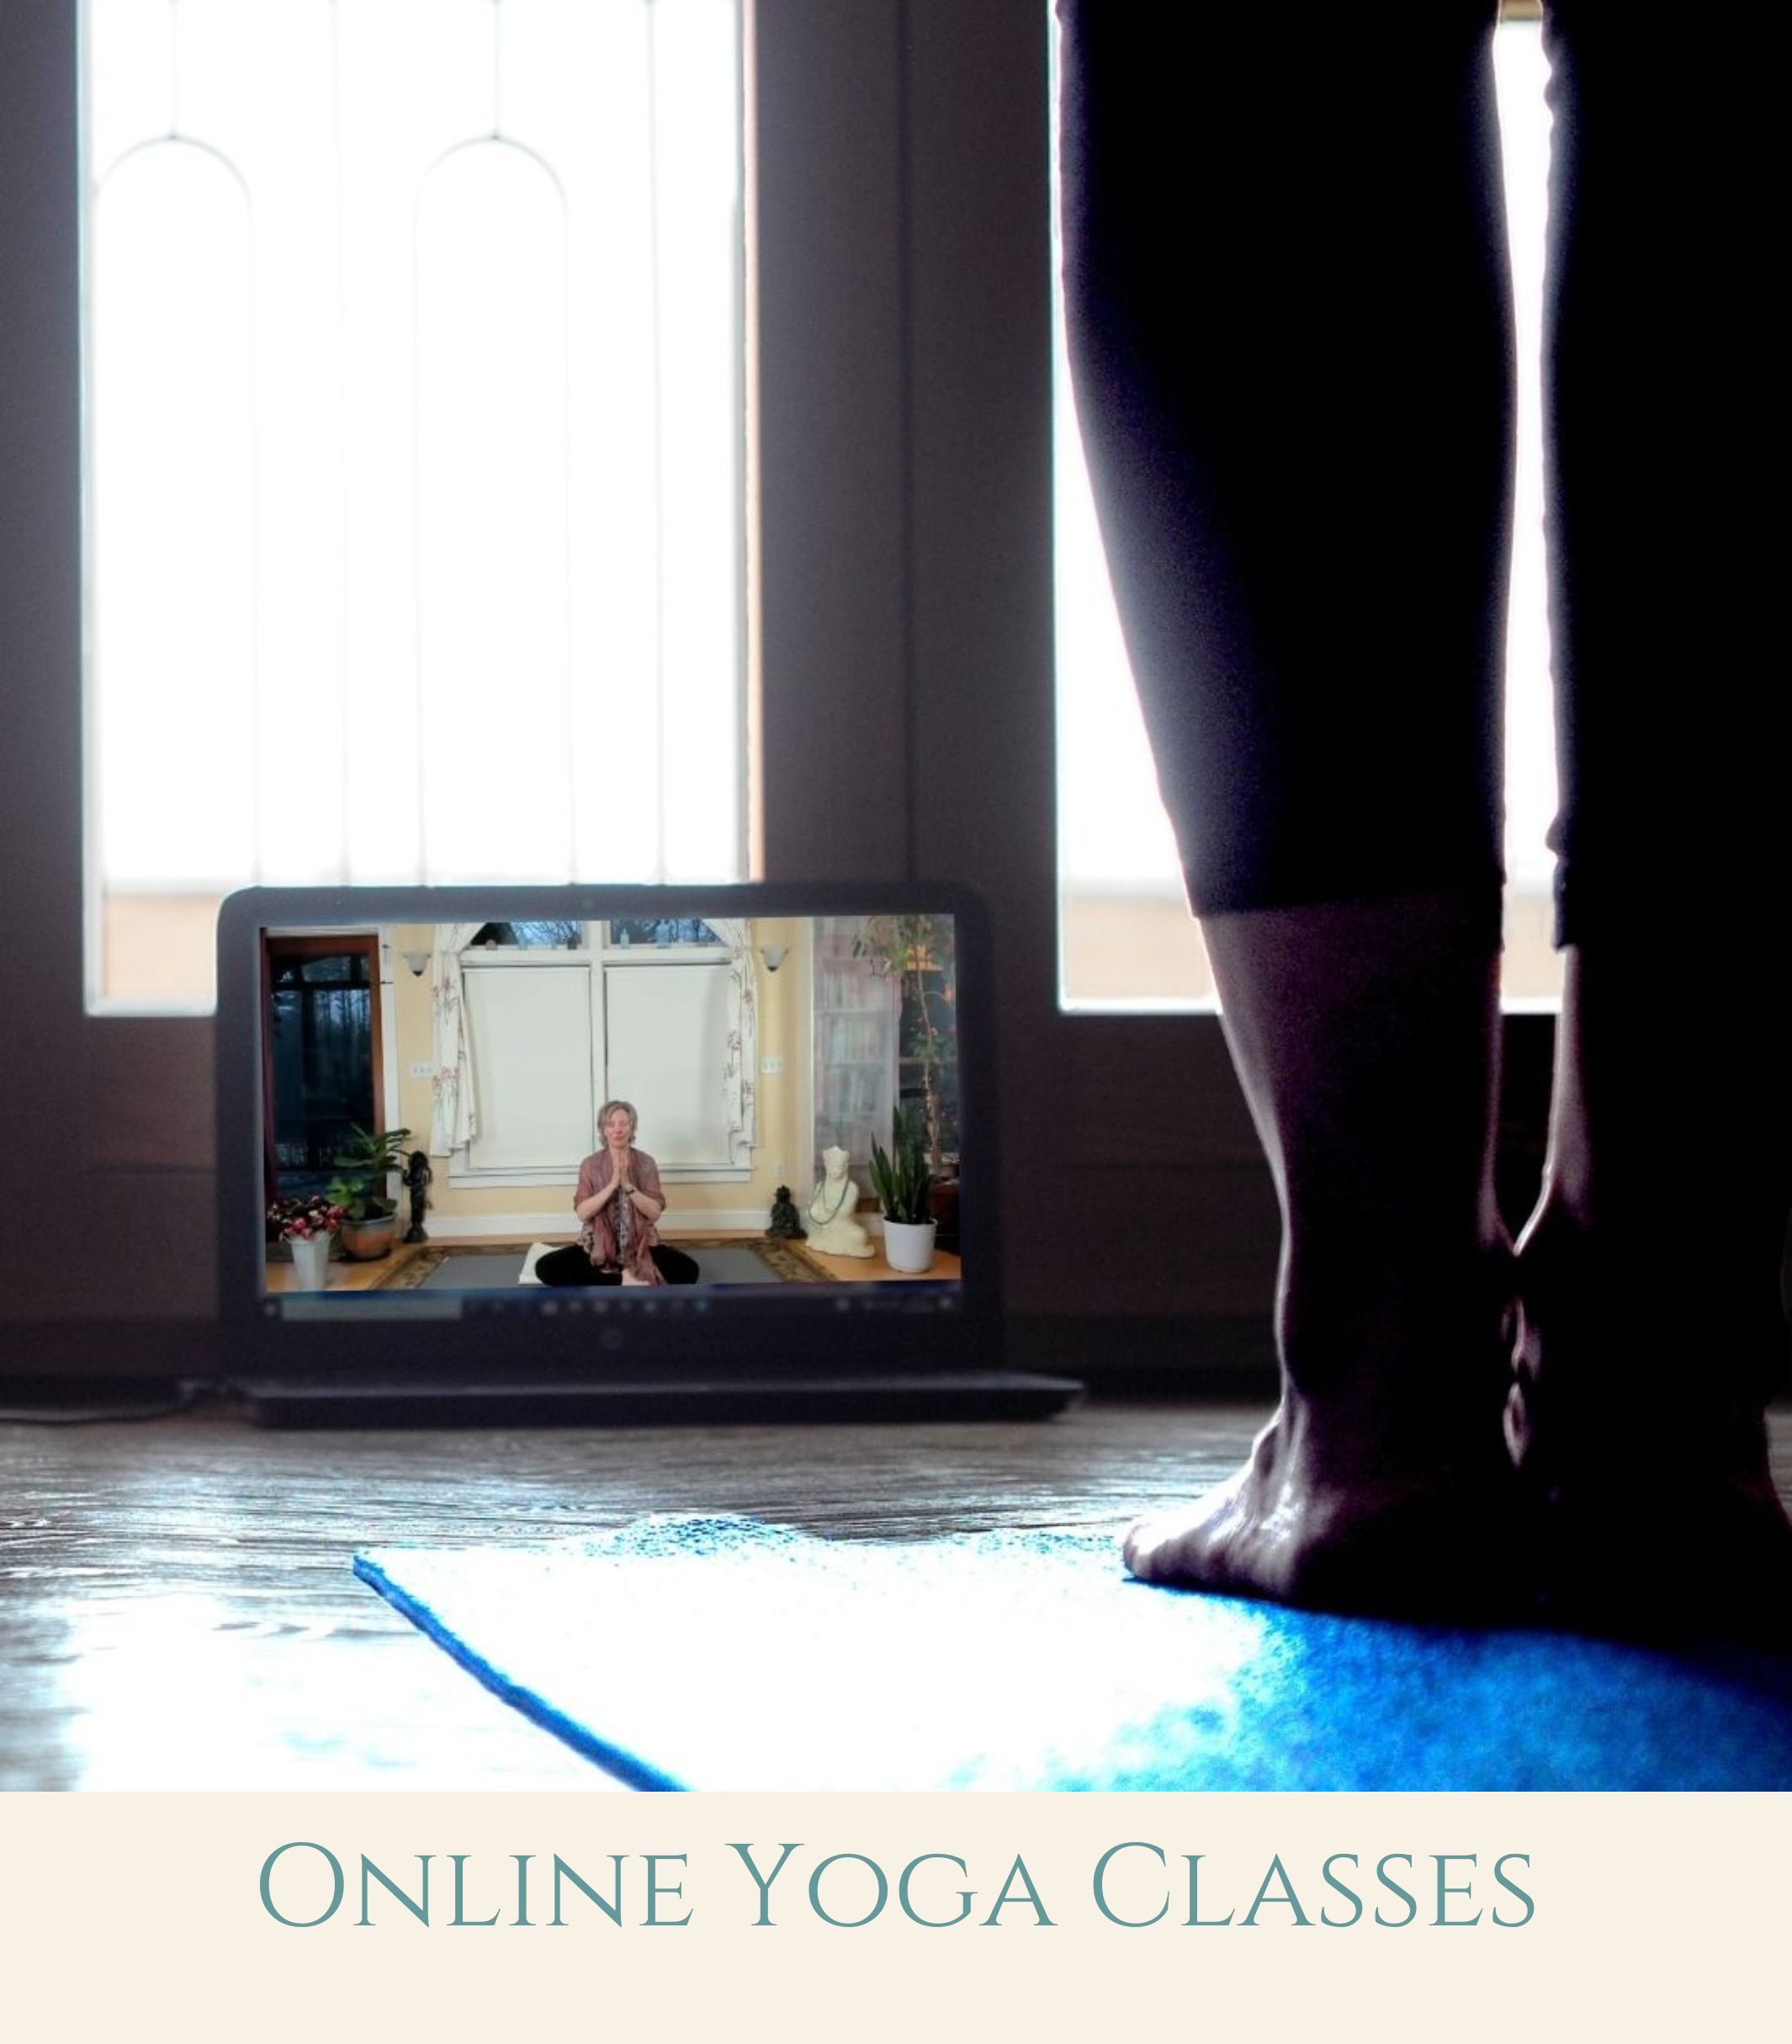 Image of Laptop with Yoga class online